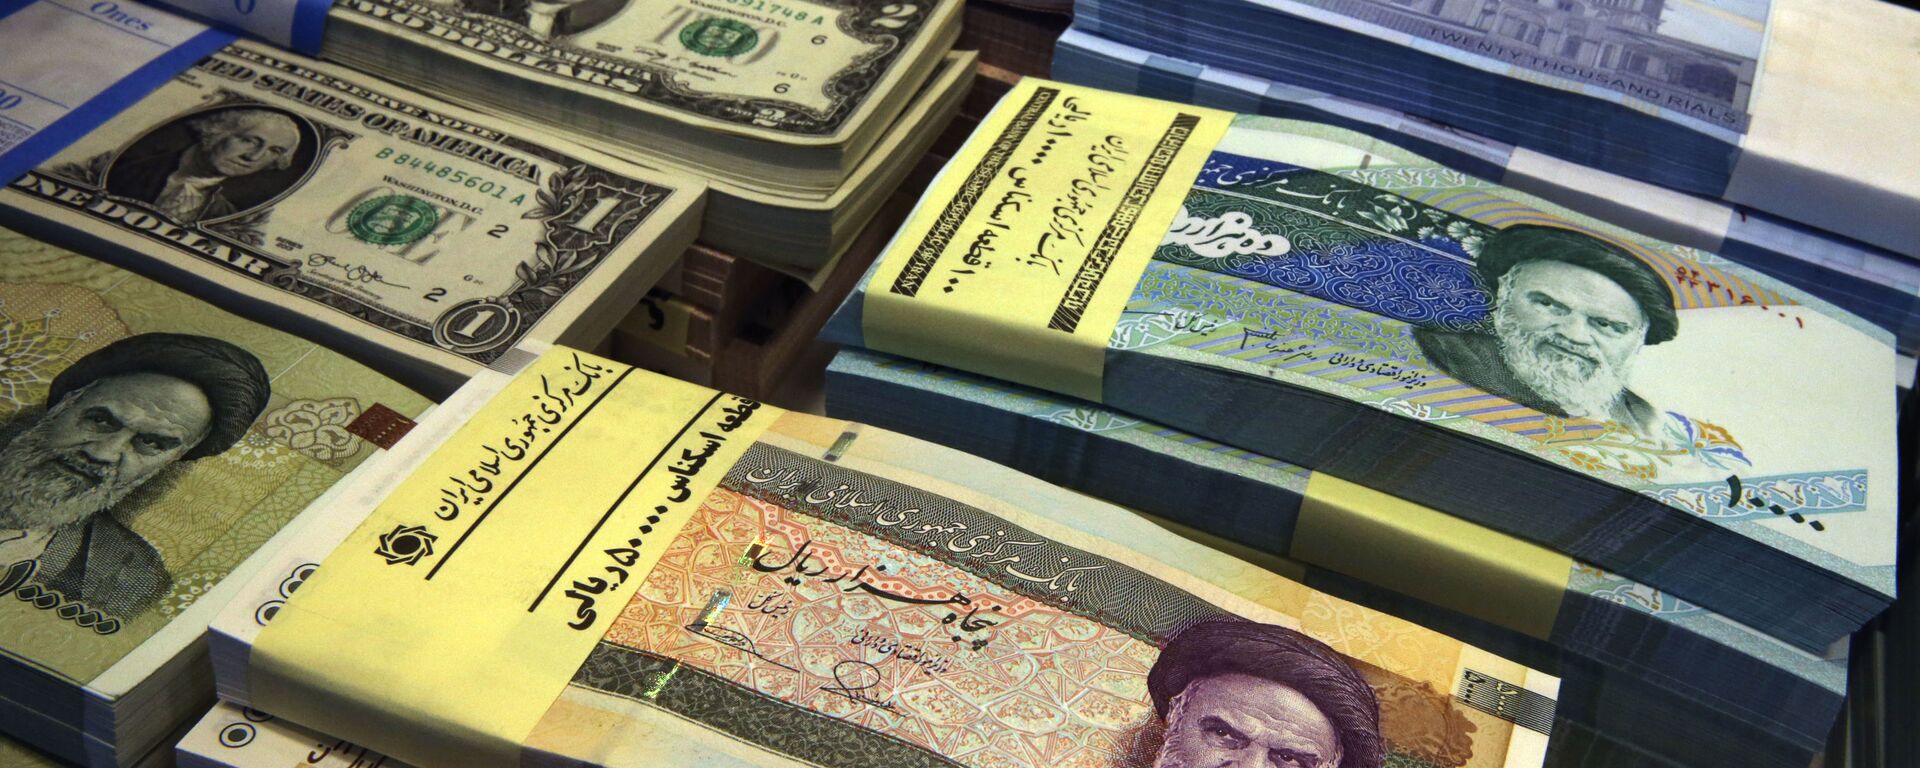 In this April 4, 2015 file photo, Iranian and U.S. banknotes are on display at a currency exchange shop in downtown Tehran, Iran. Iran's president has sent a bill to parliament that would cut four zeroes from value of the nation's sanctions-battered currency, the rial. Semi-official news agencies reported the news on Wednesday, Aug. 21, 2019, saying President Hassan Rouhani sent the bill with urgency to the parliament to consider. Iran's rial has been hammered by the effects of increasing U.S. sanctions on the country. - Sputnik International, 1920, 08.06.2022